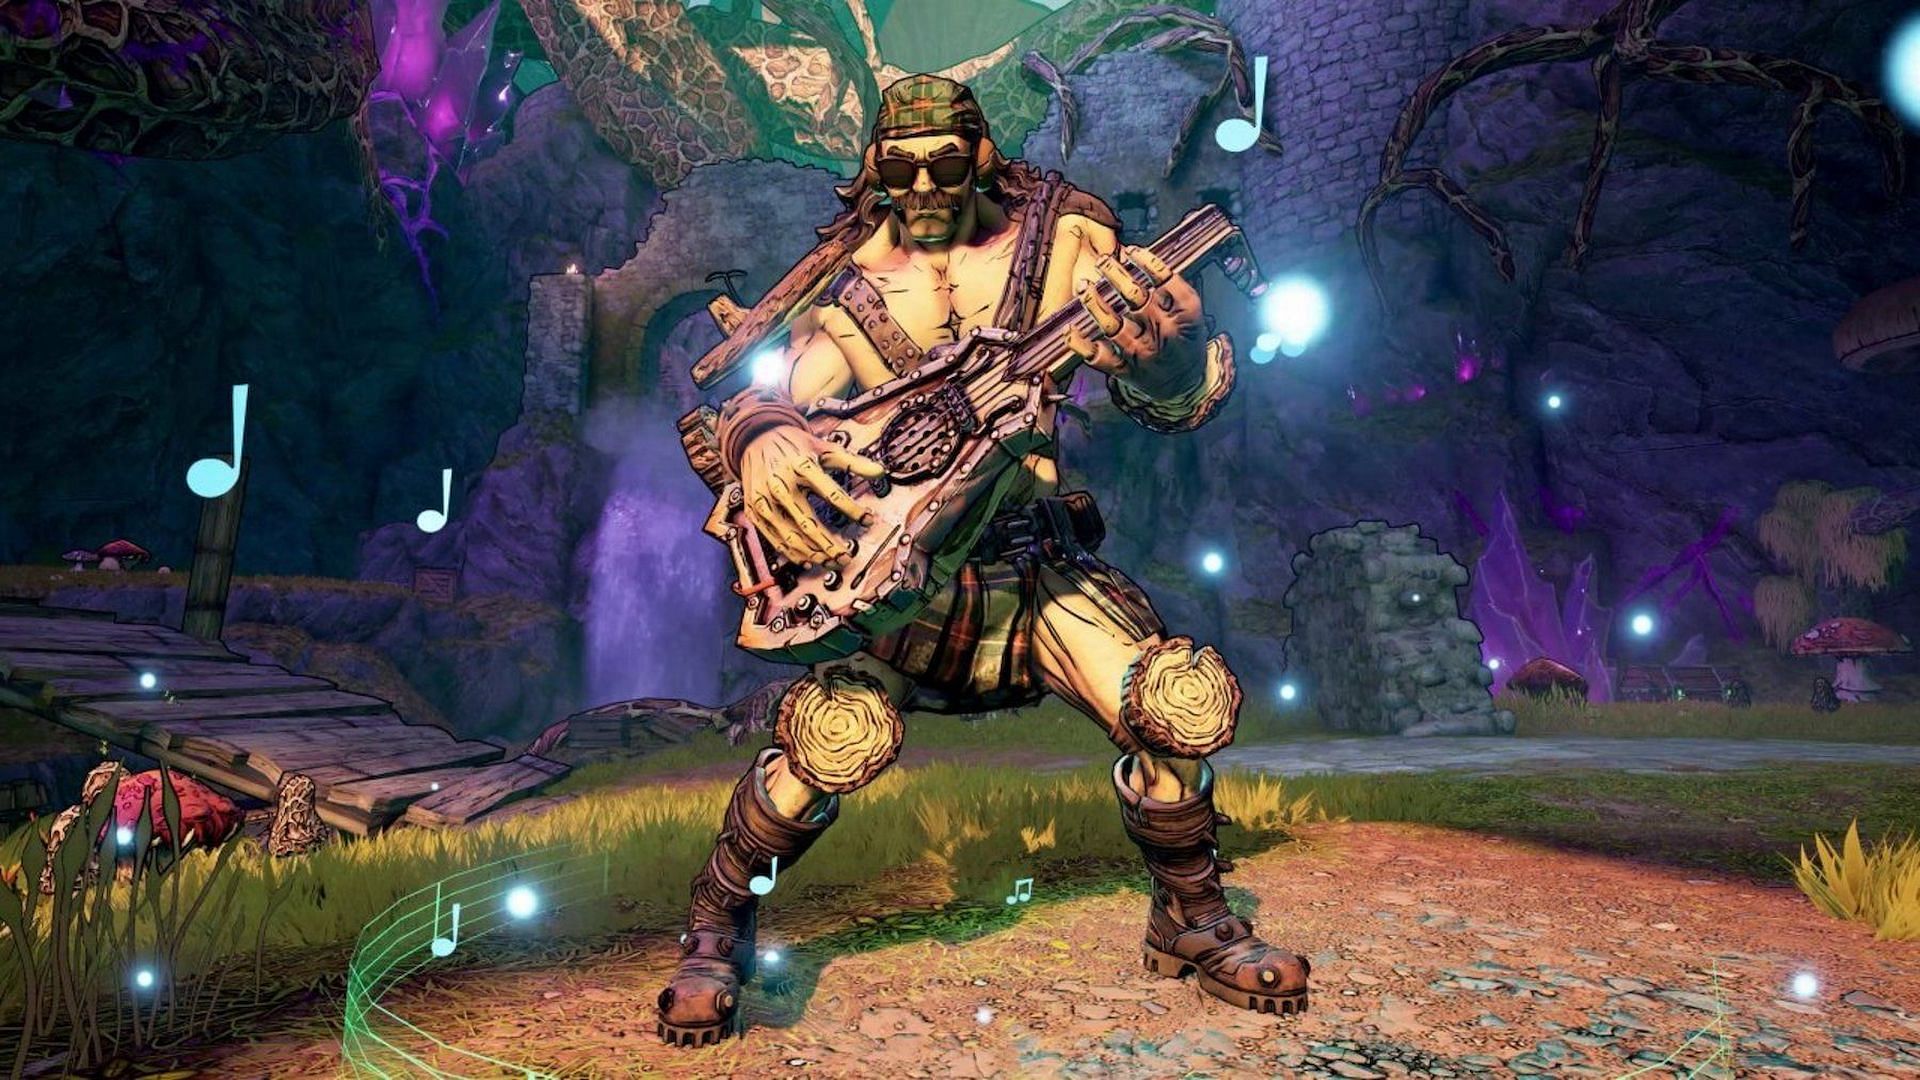 Mr. Torgue makes his appearance as a bard (Image via Gearbox Software)